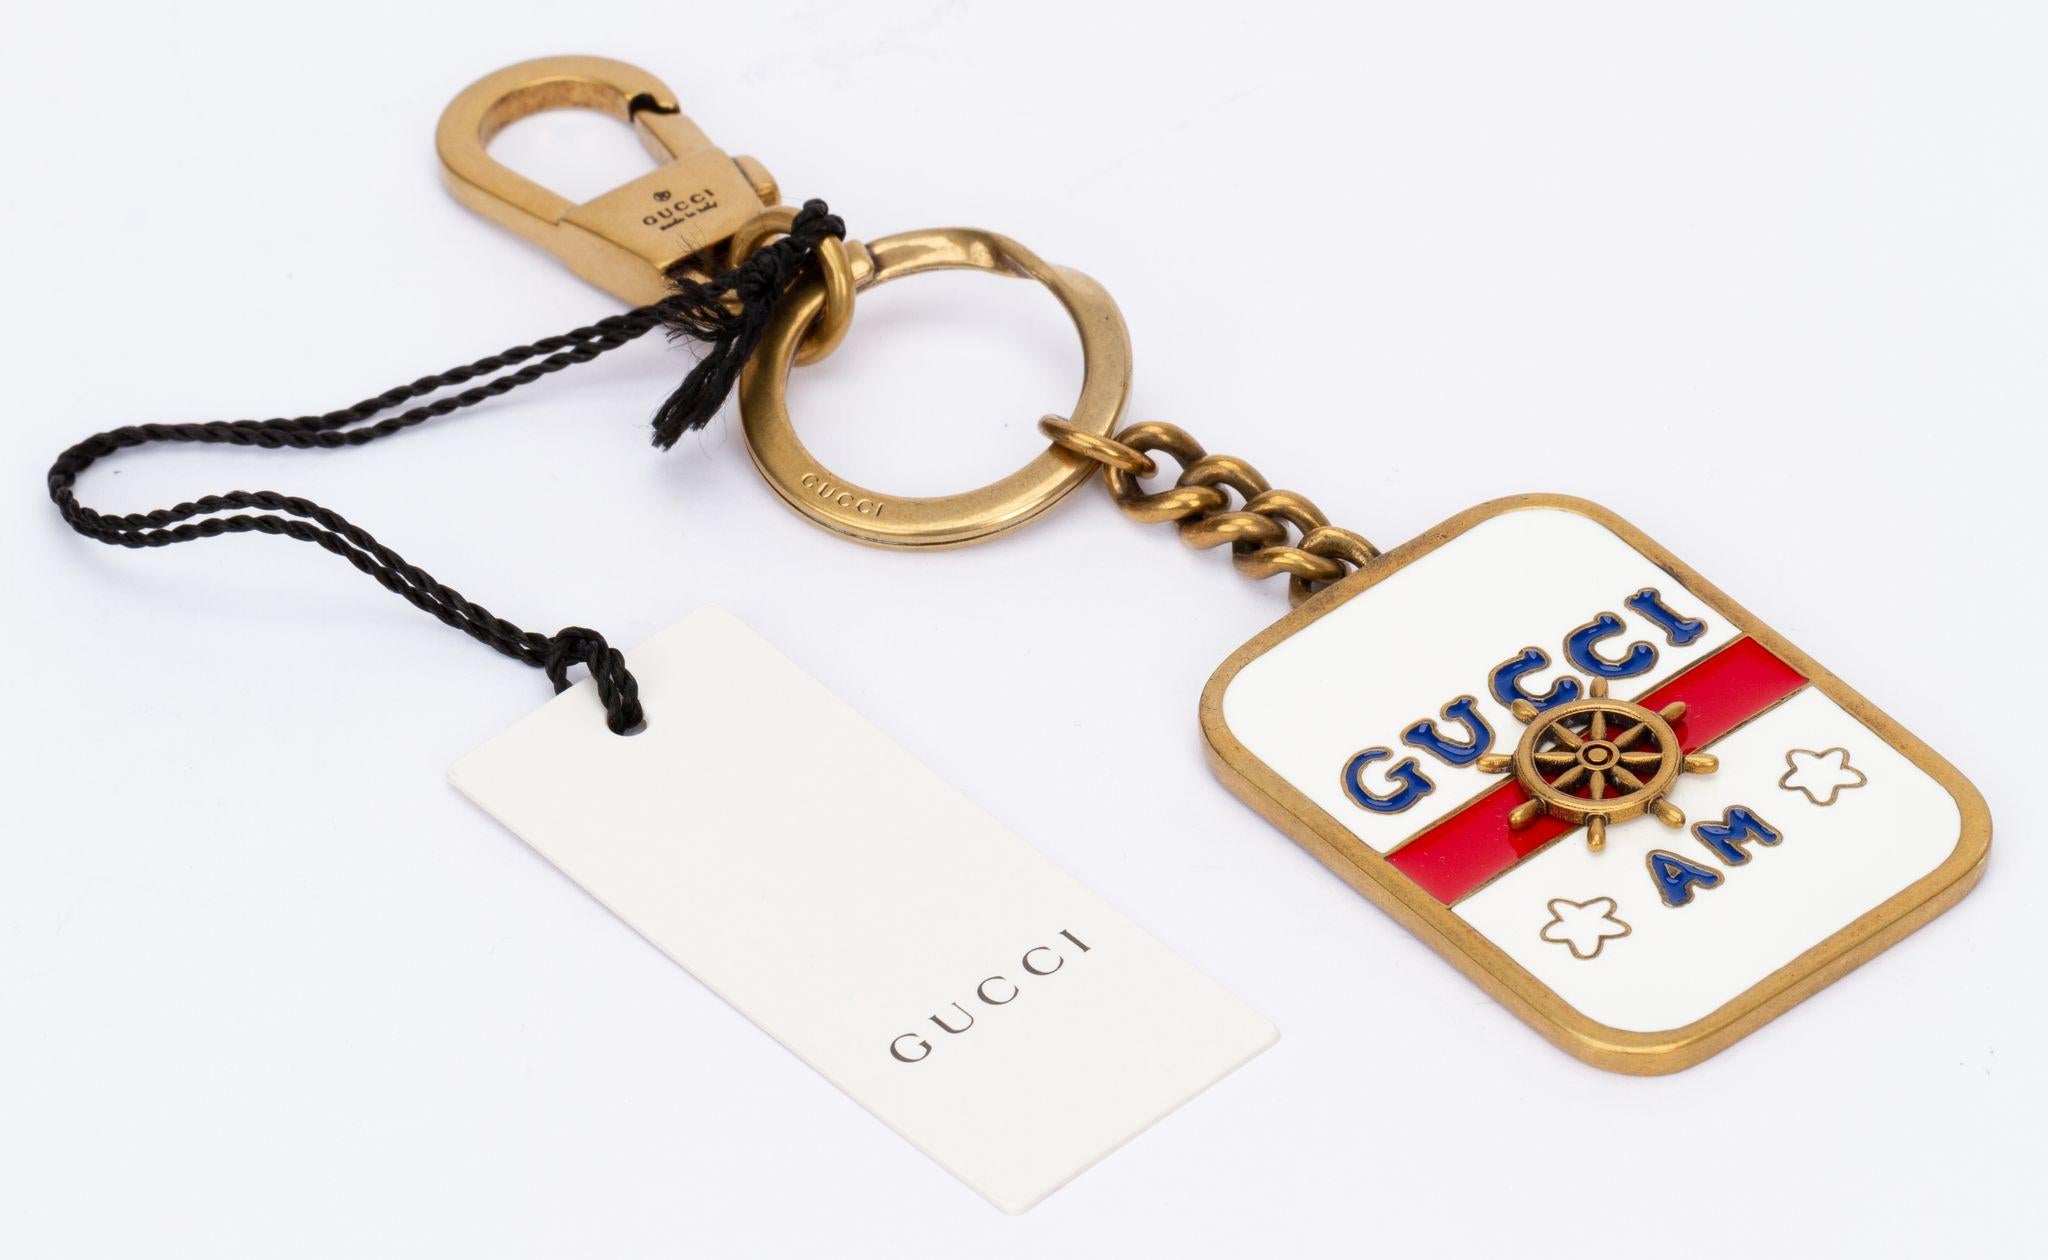 Gucci Multicolored nautical keychain. Featuring a marine-inspired design, a red, white and blue enamel detail, a rectangular silhouette, a key ring, a lobster clasp, an engraved logo on the back. The piece is brand new and comes with the tag,